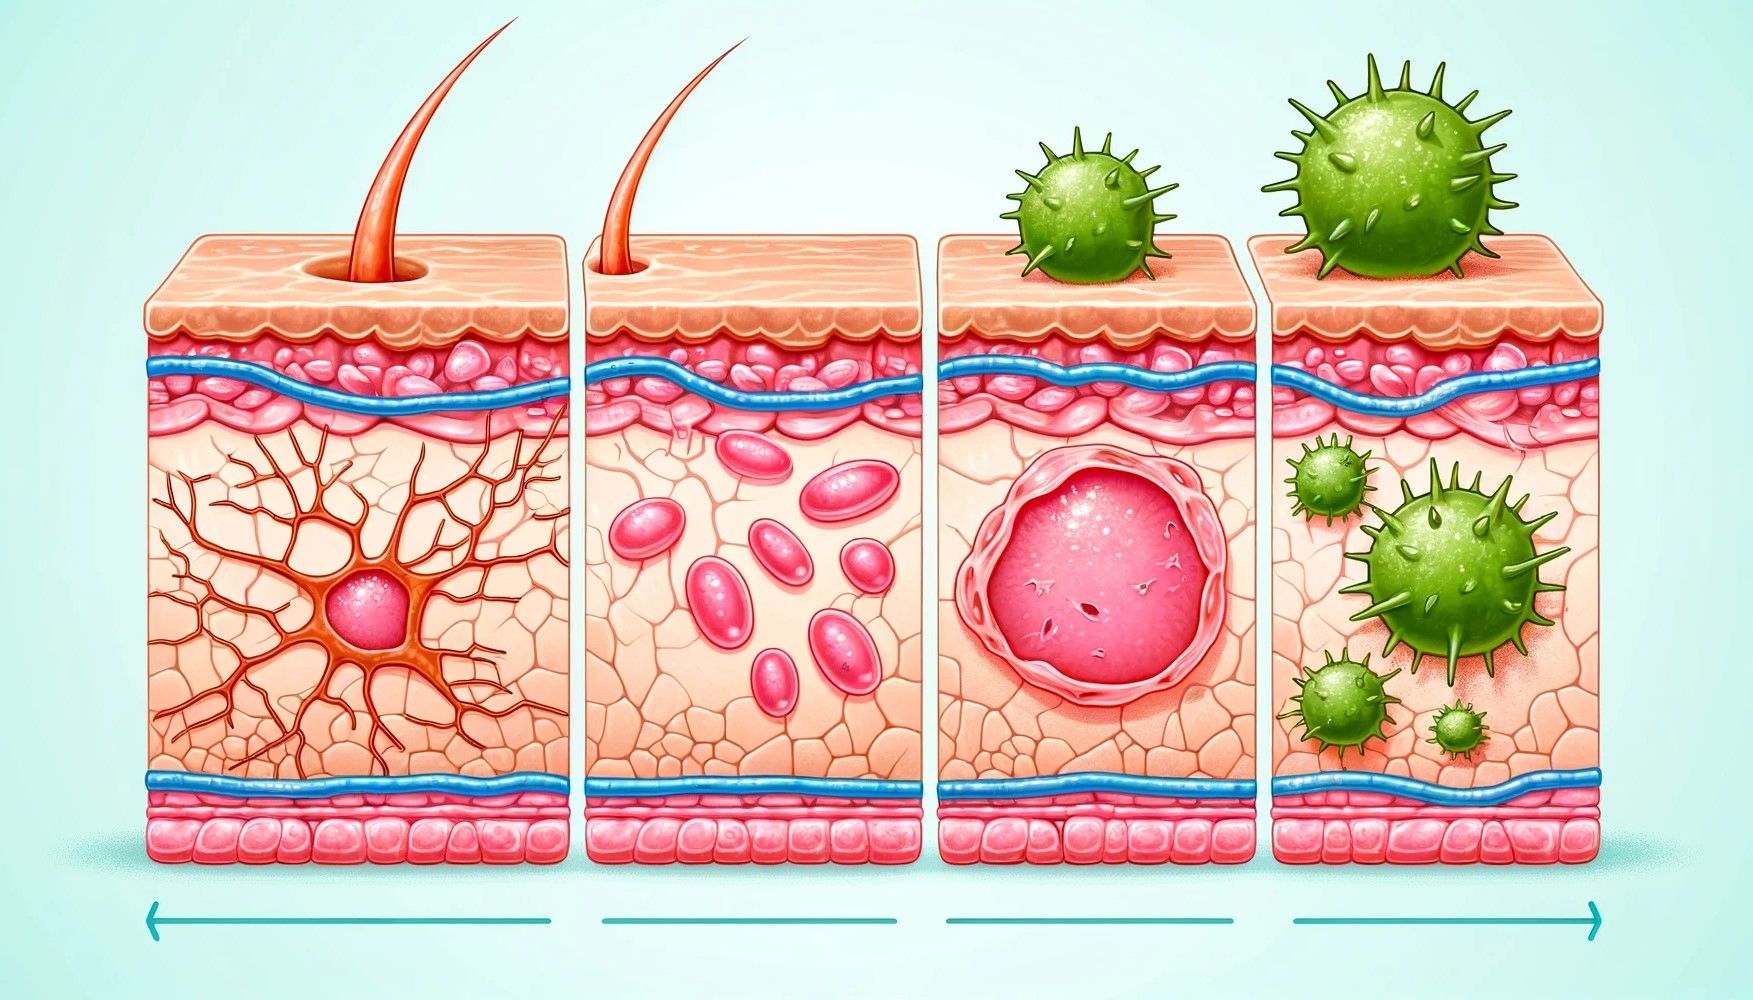 On the left, there's damaged skin with visible injuries; in the middle, stem cells are actively dividing and migrating; on the right, the skin appears healed and rejuvenated